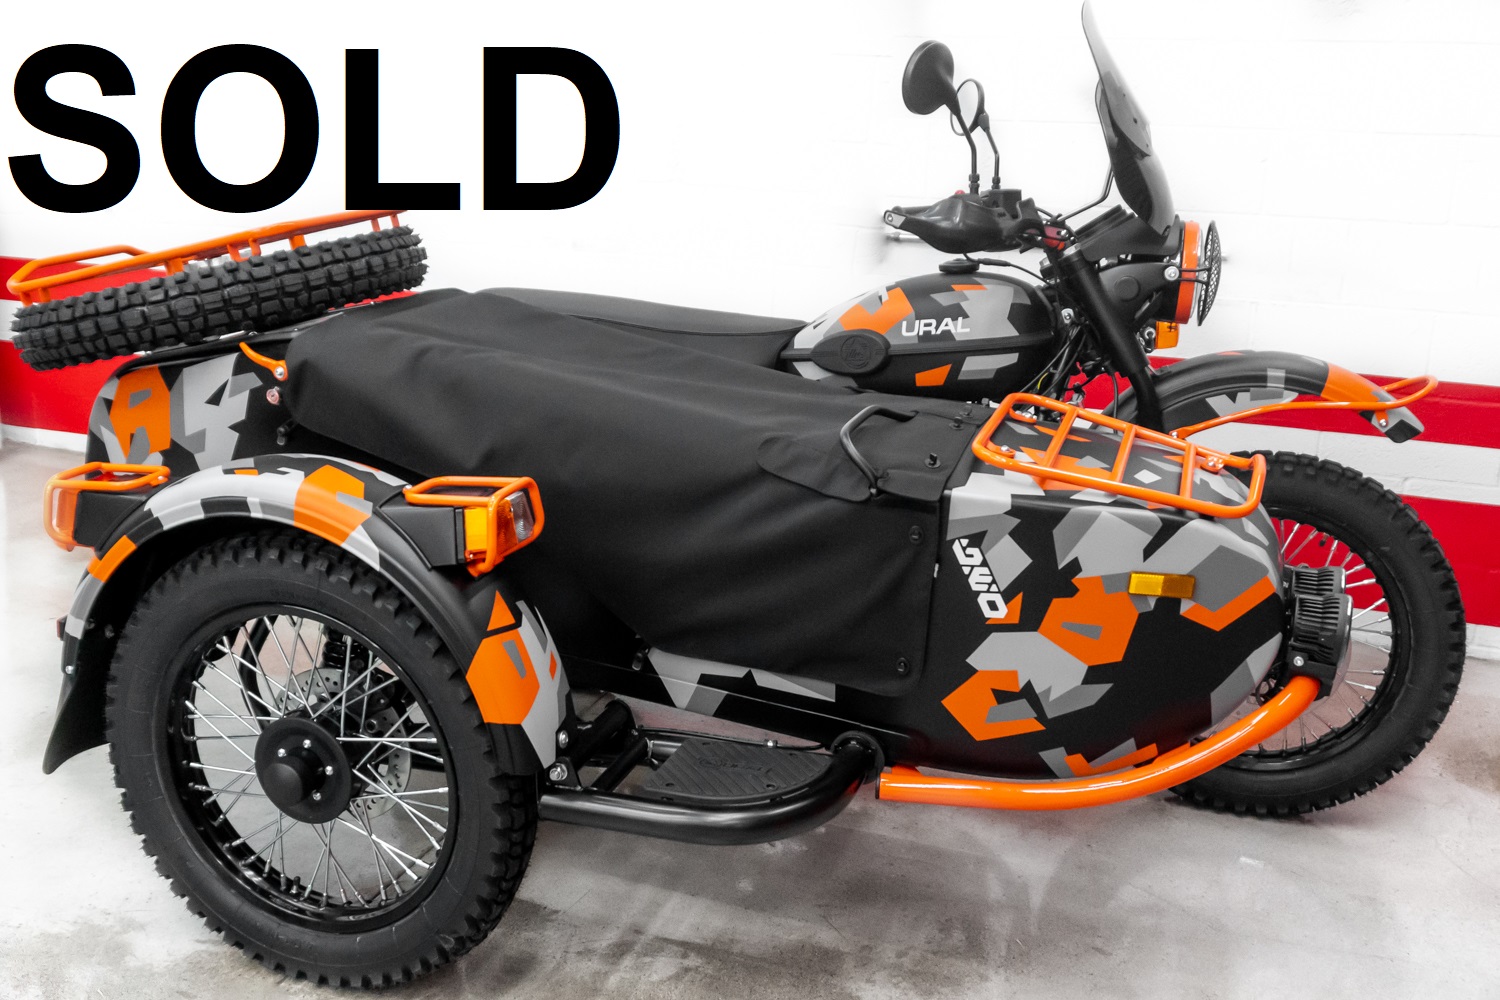 2021 Ural Gear Up (2WD) - NEW 2021 MODEL - LIMITED EDITION